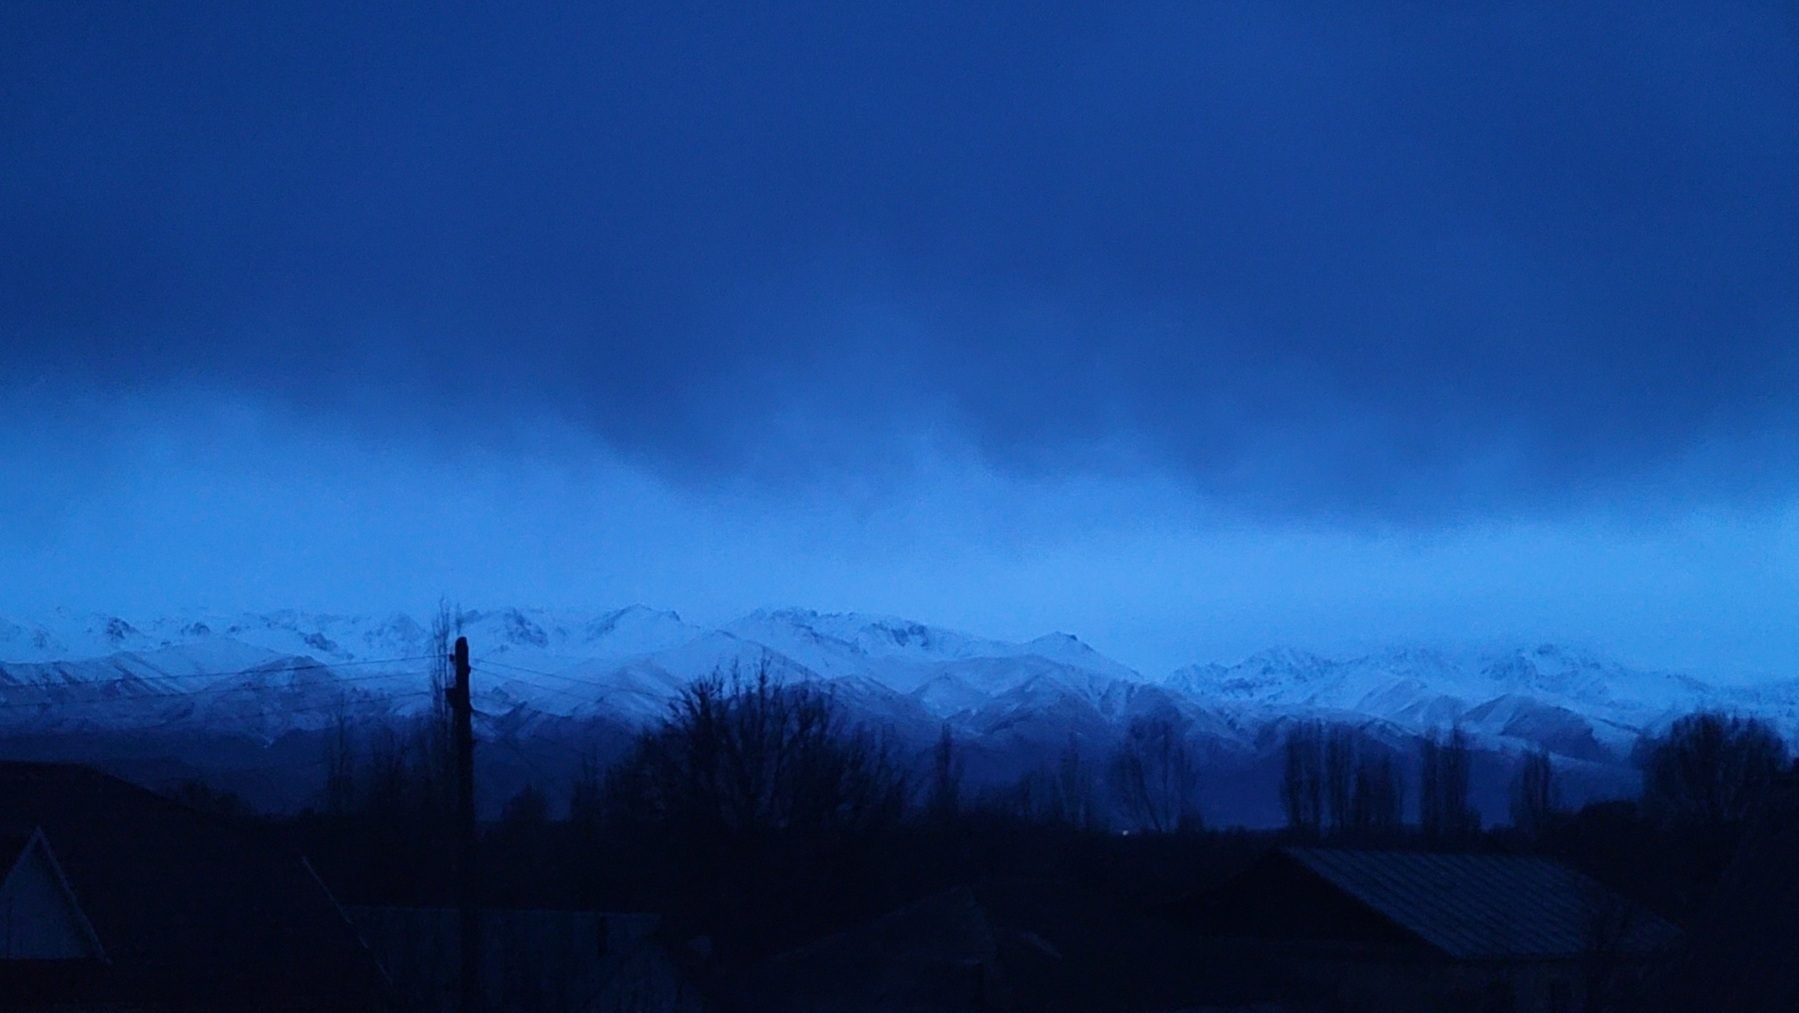 snow-capped mountains against a blue sky after sunset, with dark clouds hanging in the sky almost just above the mountains. silhouettes of trees, houses and a powerline in front of the mountains